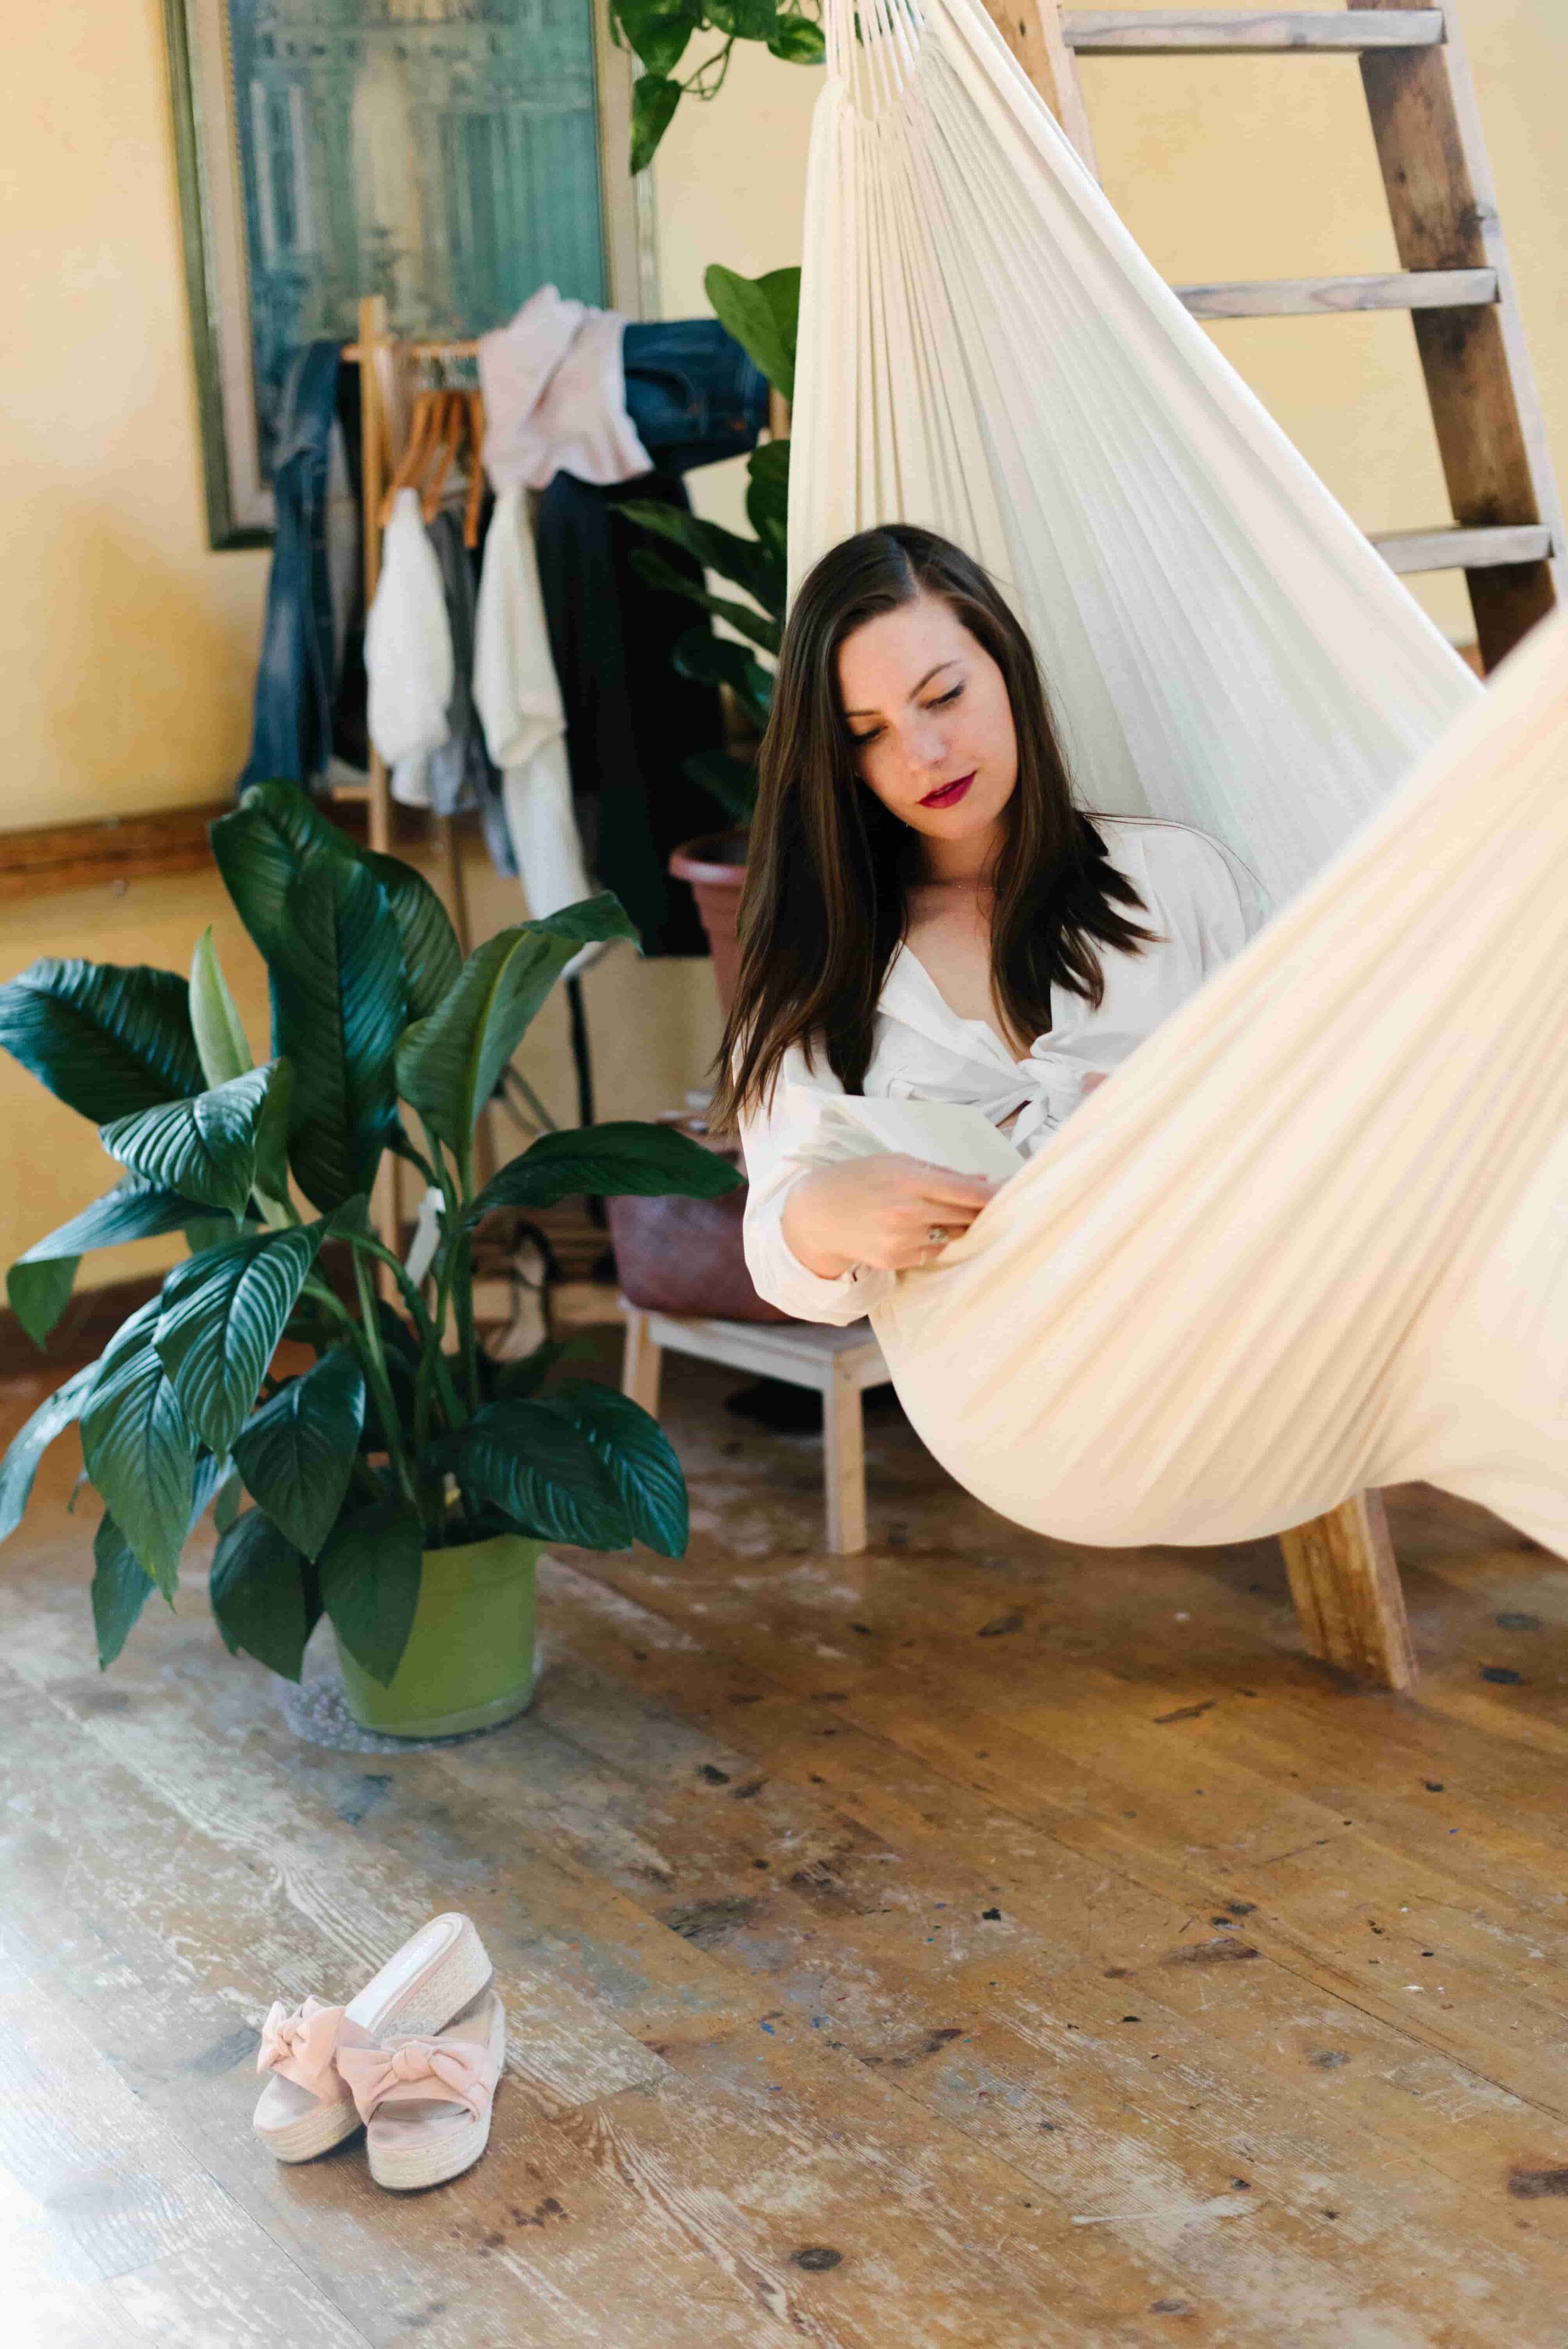 indoor hammock | Sustainable and Cheap - 15 Self-Care Ideas from www.goingzerowaste.com #zerowaste #ecofriendly #gogreen #sustainable #selfcare